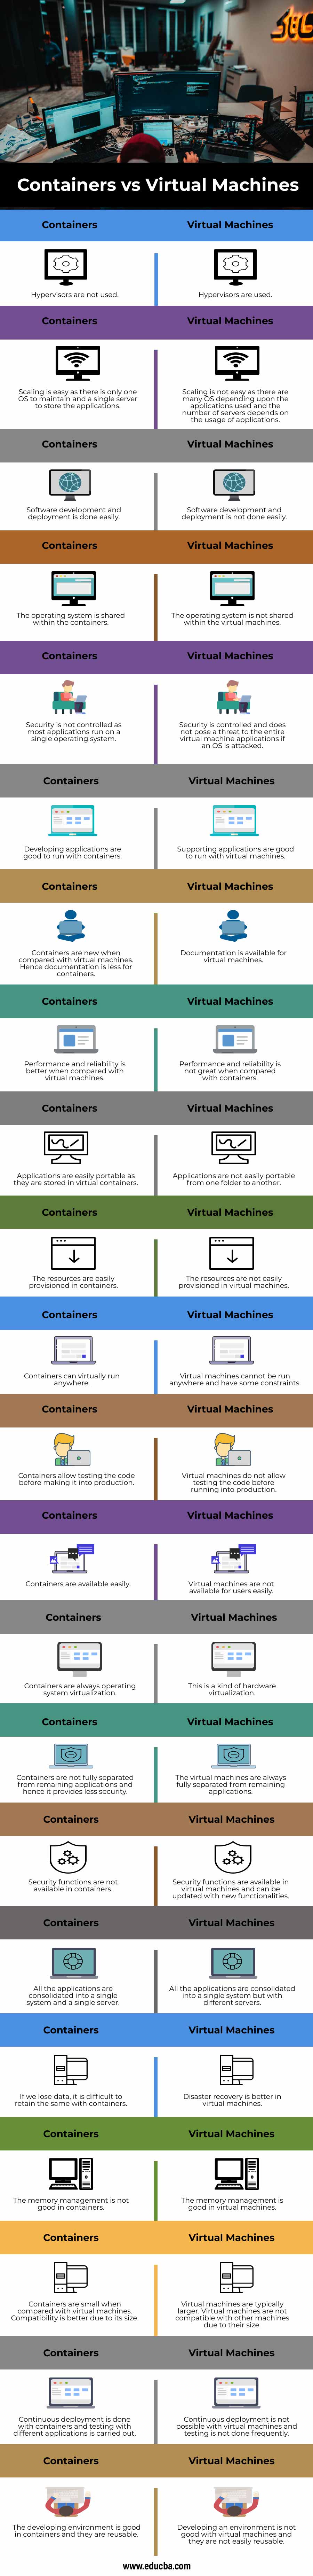 Containers-vs-Virtual-Machines